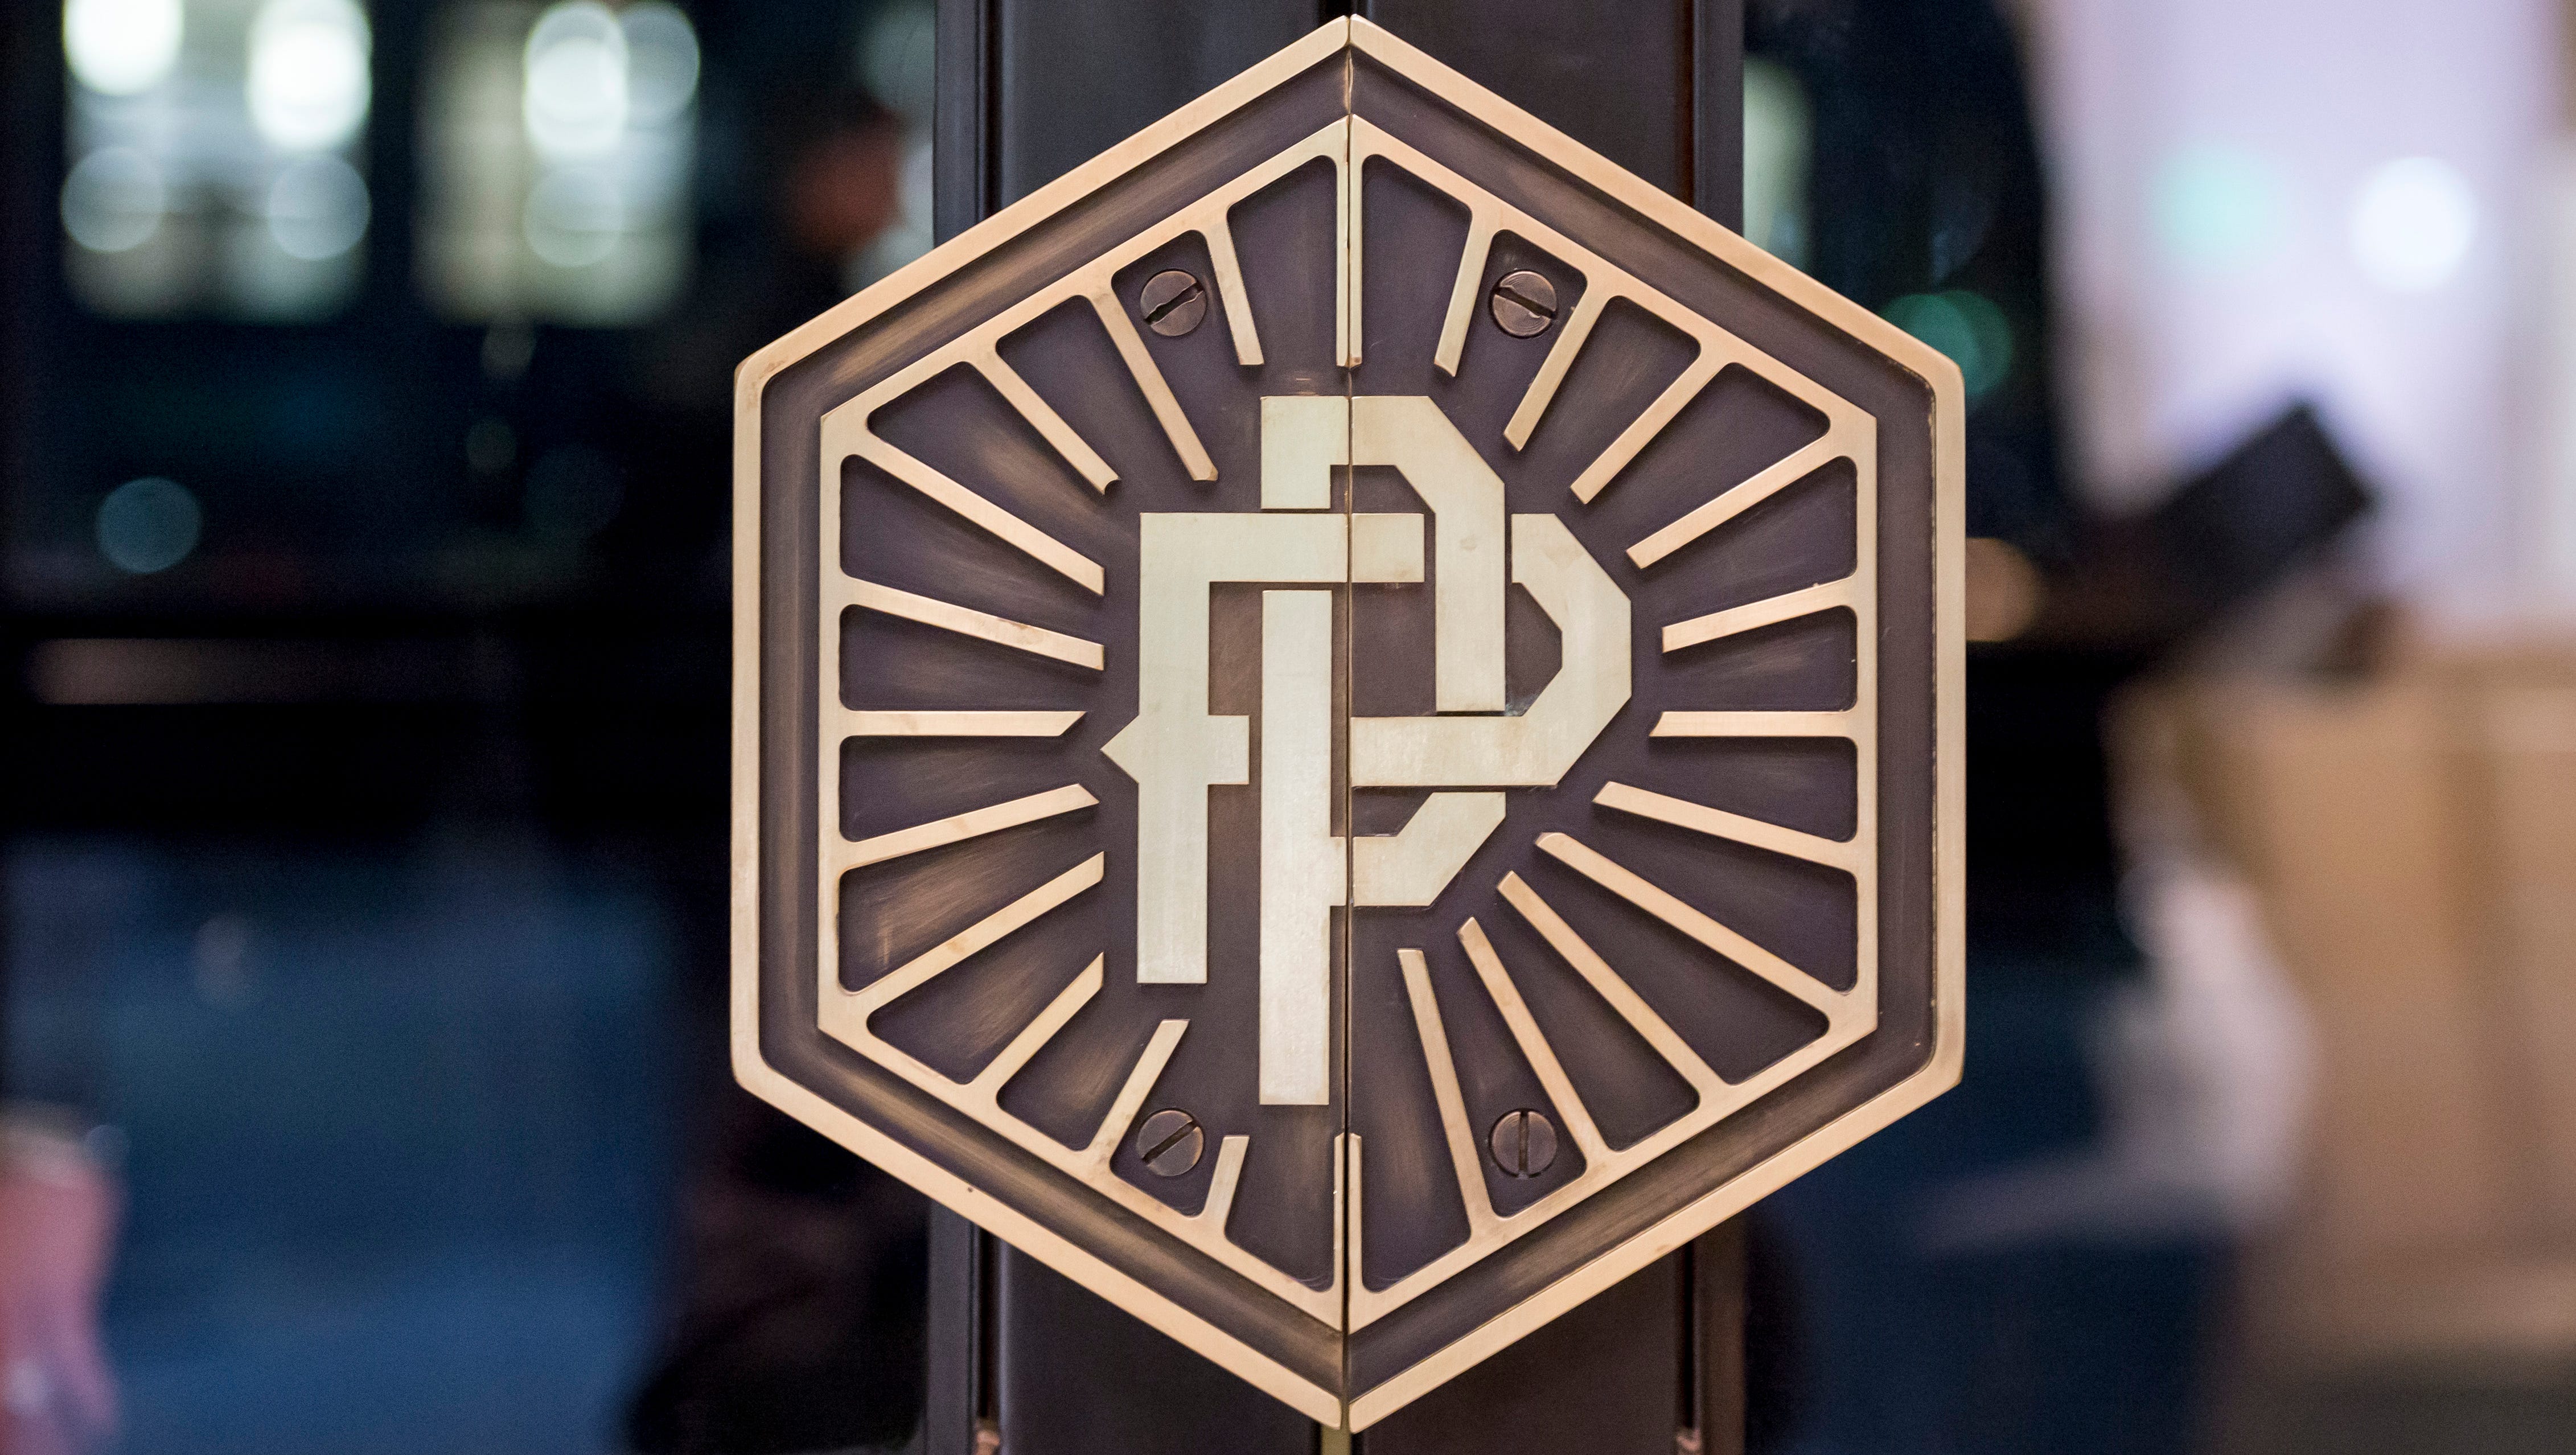 The front doors greet you with the Prime + Proper logo.